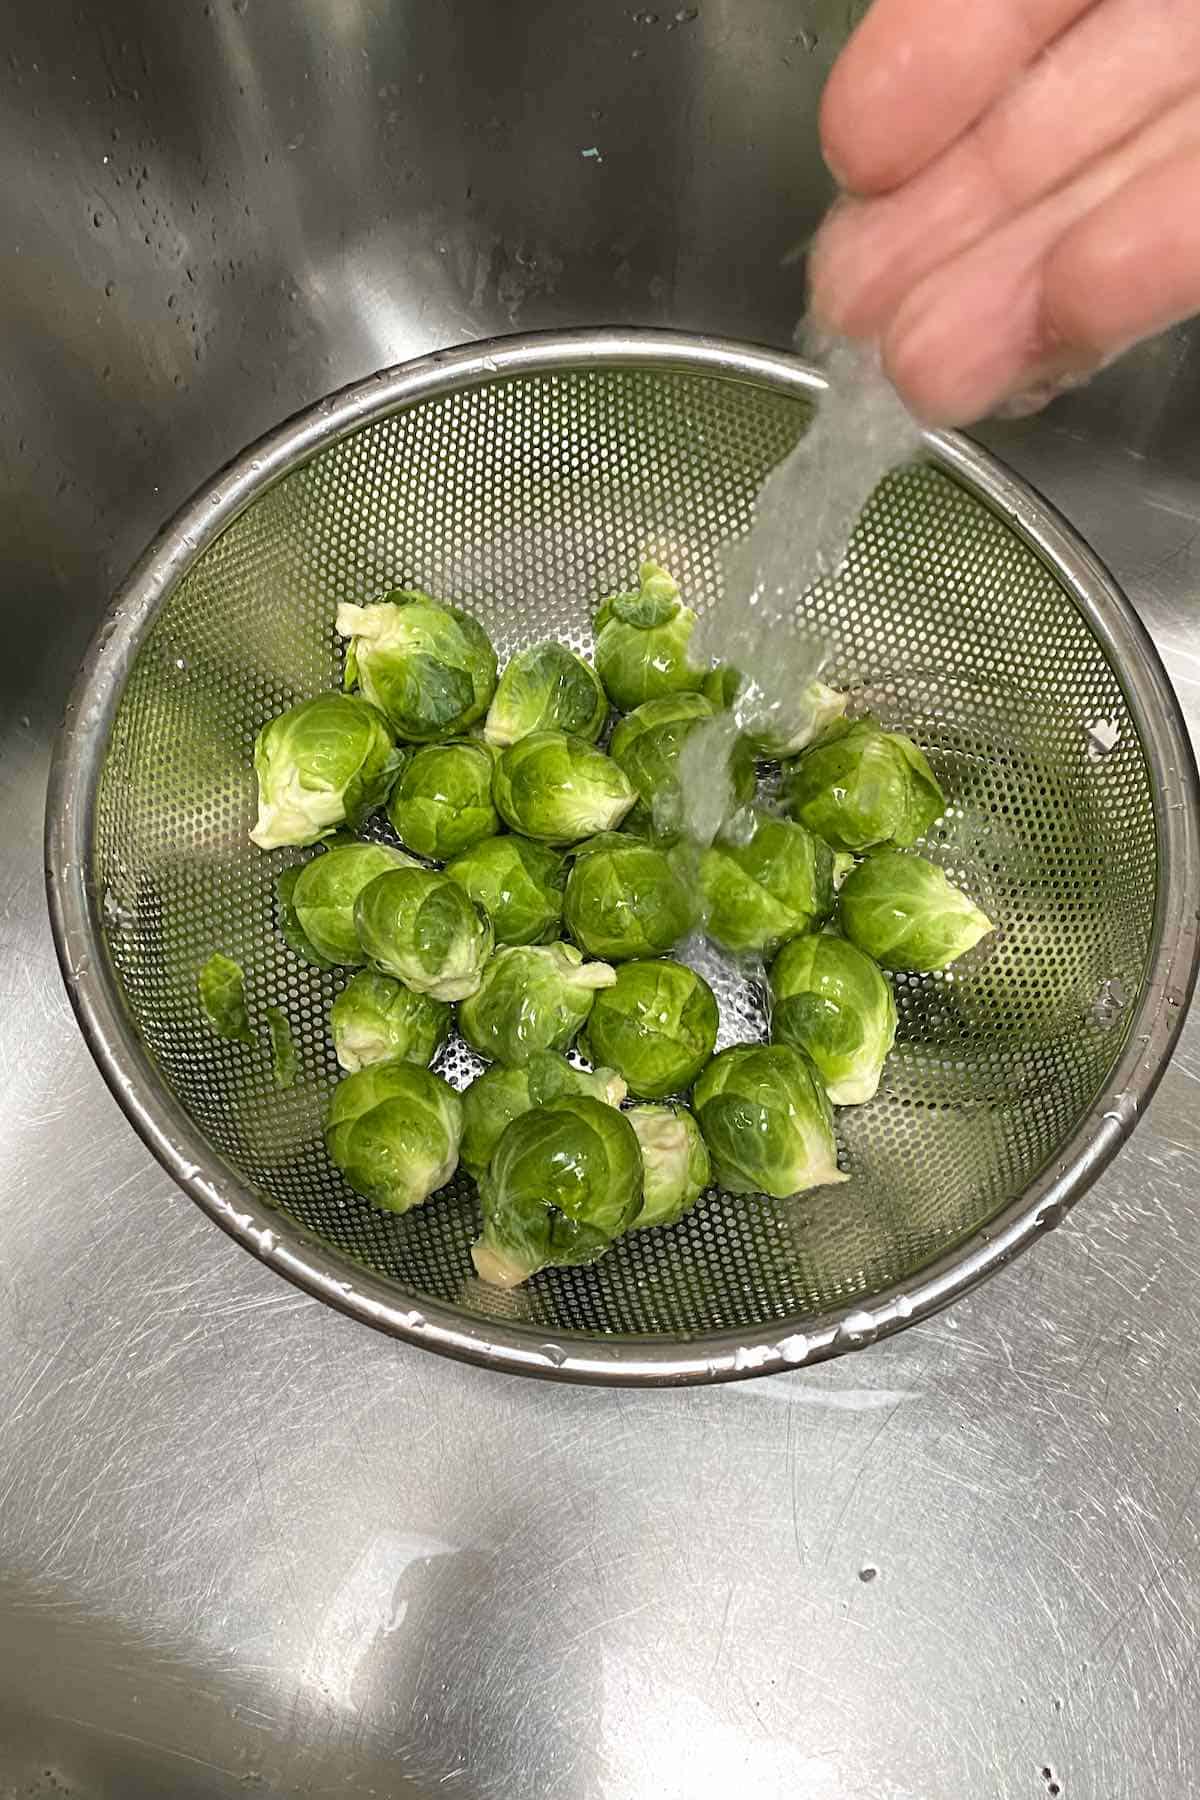 Rinsing Brussels sprouts